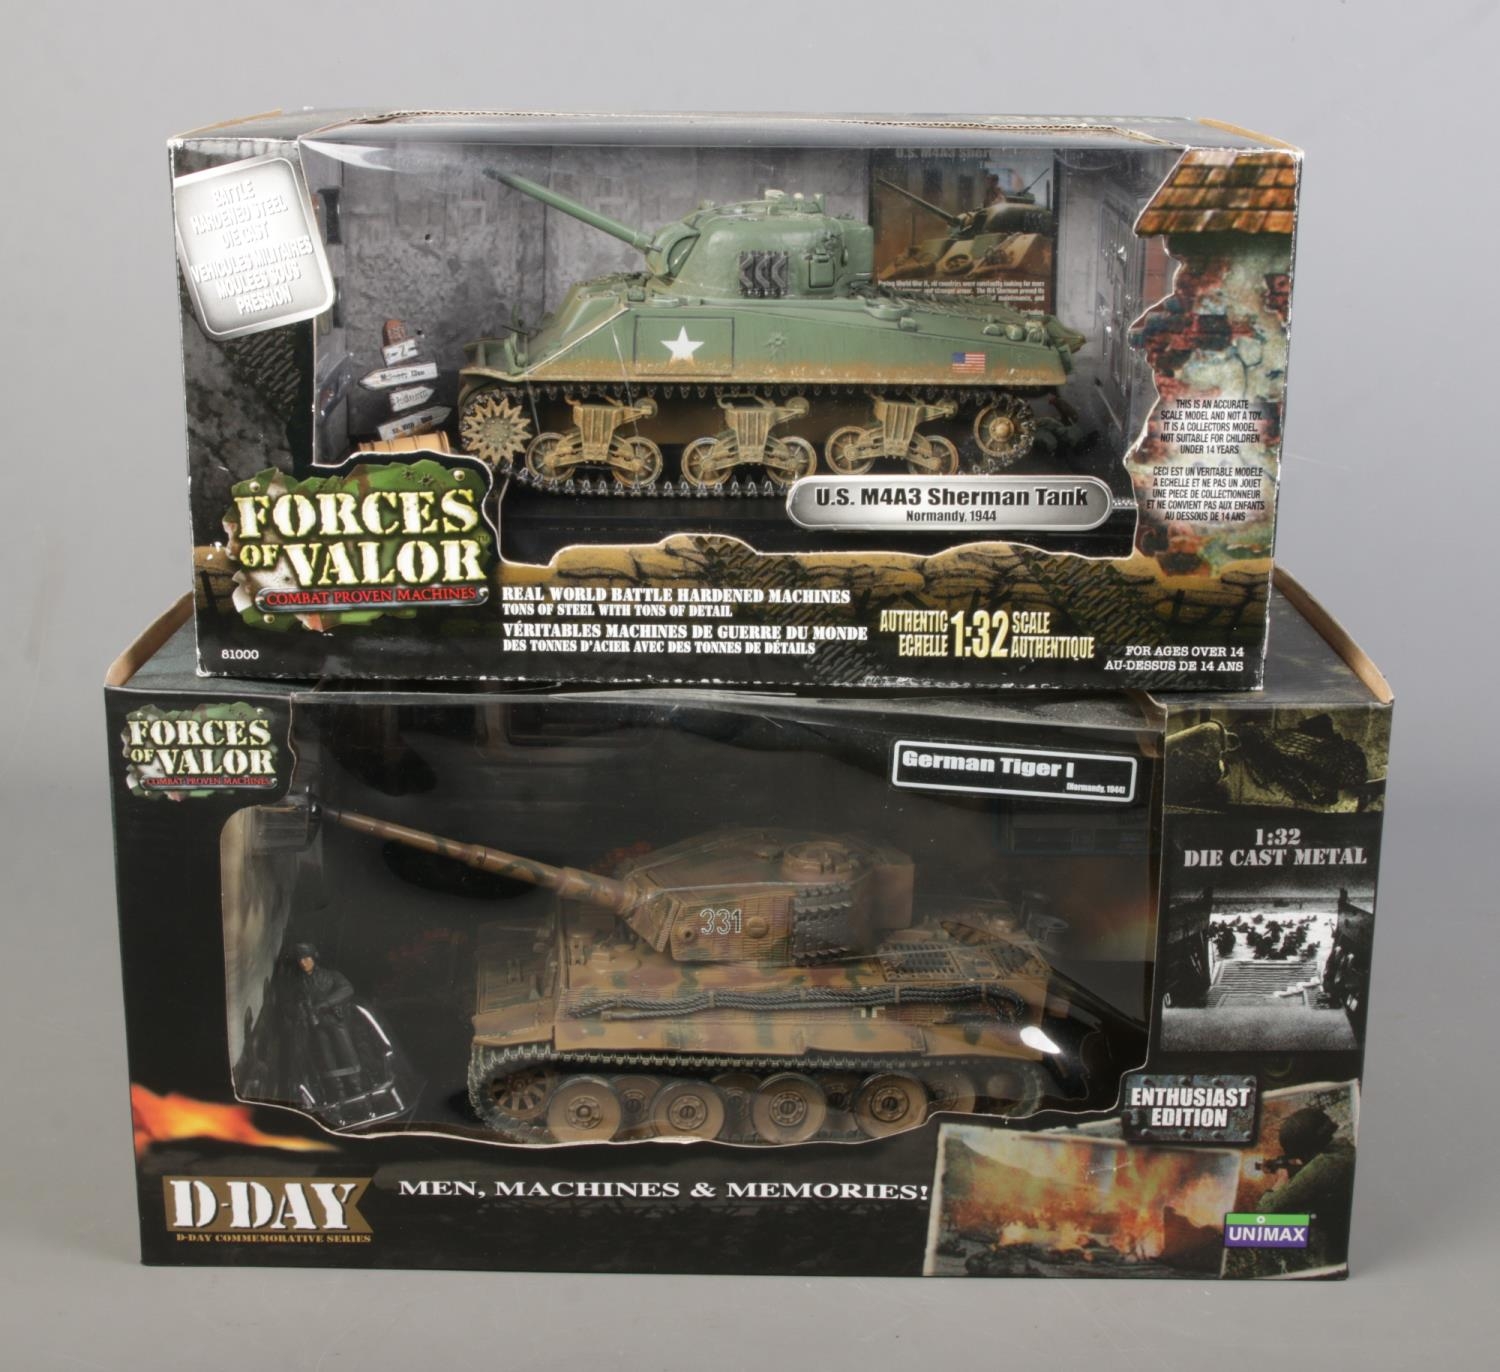 Two forces of valour combat proven machines models including a U.S M4A3 Sherman Tank Normandy 1944